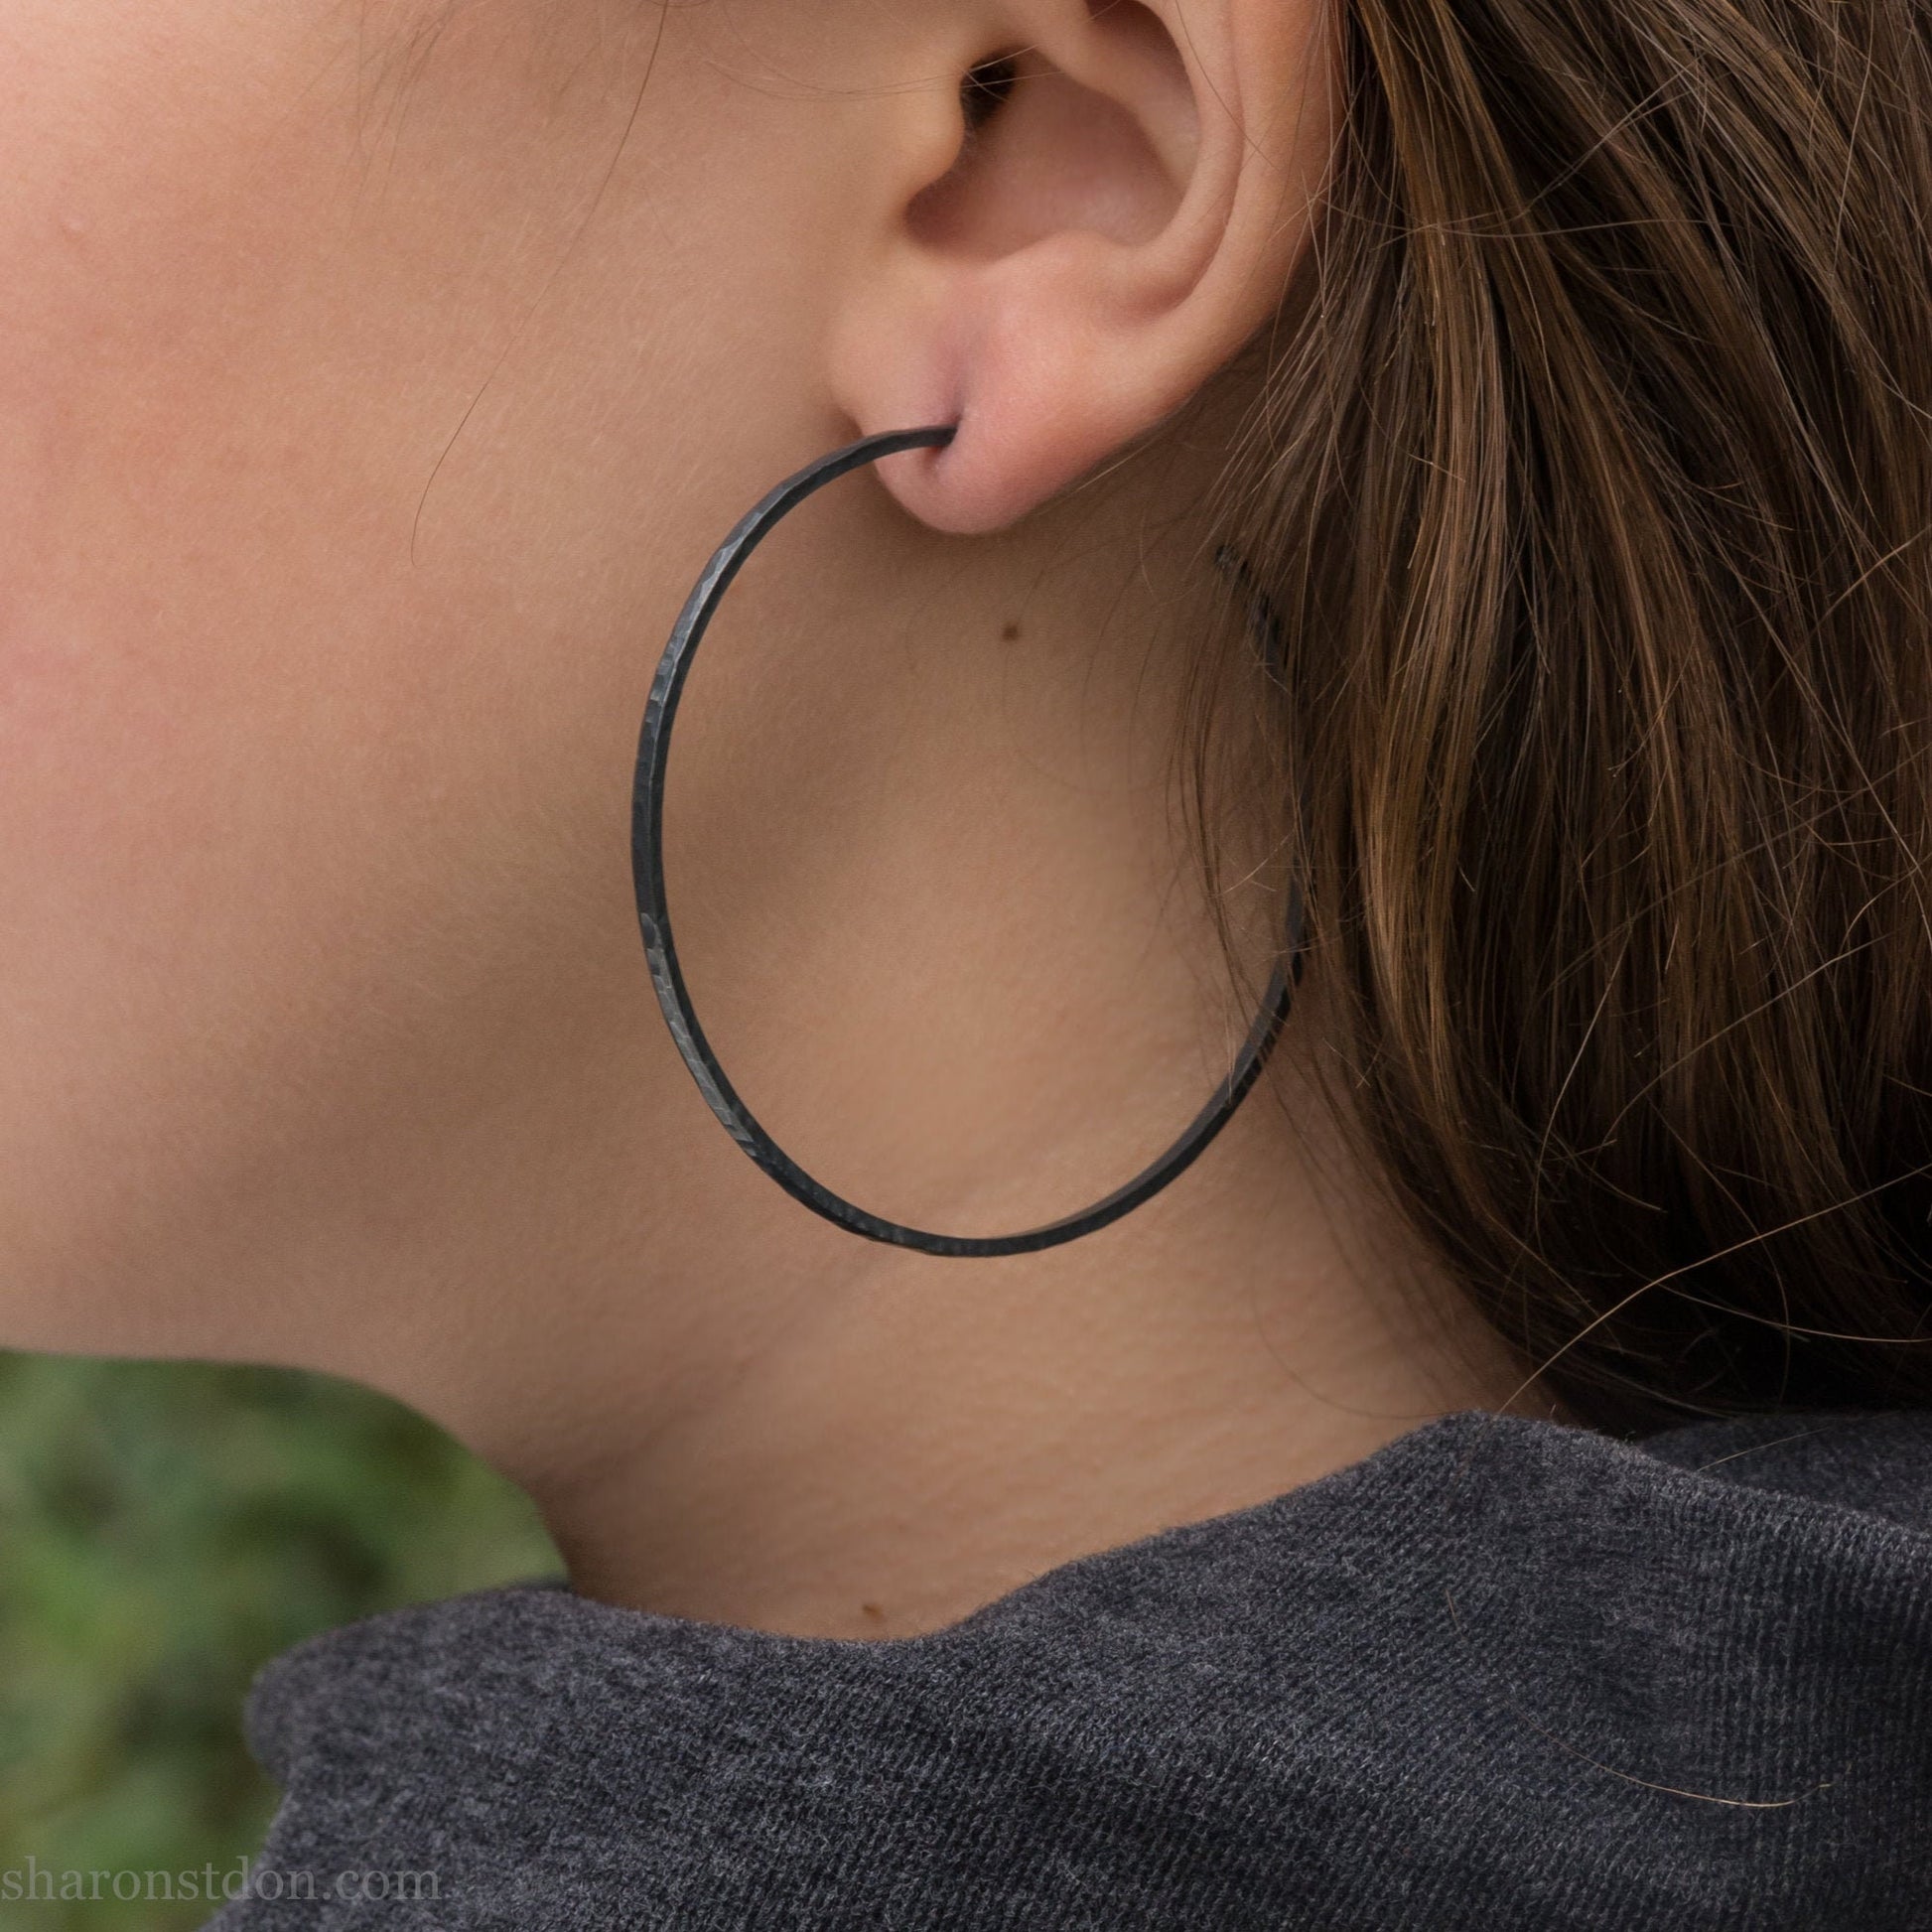 55mm 925 sterling silver hoop earrings, oxidized black. – Sharon SaintDon  Silver and Gold Handmade Jewelry